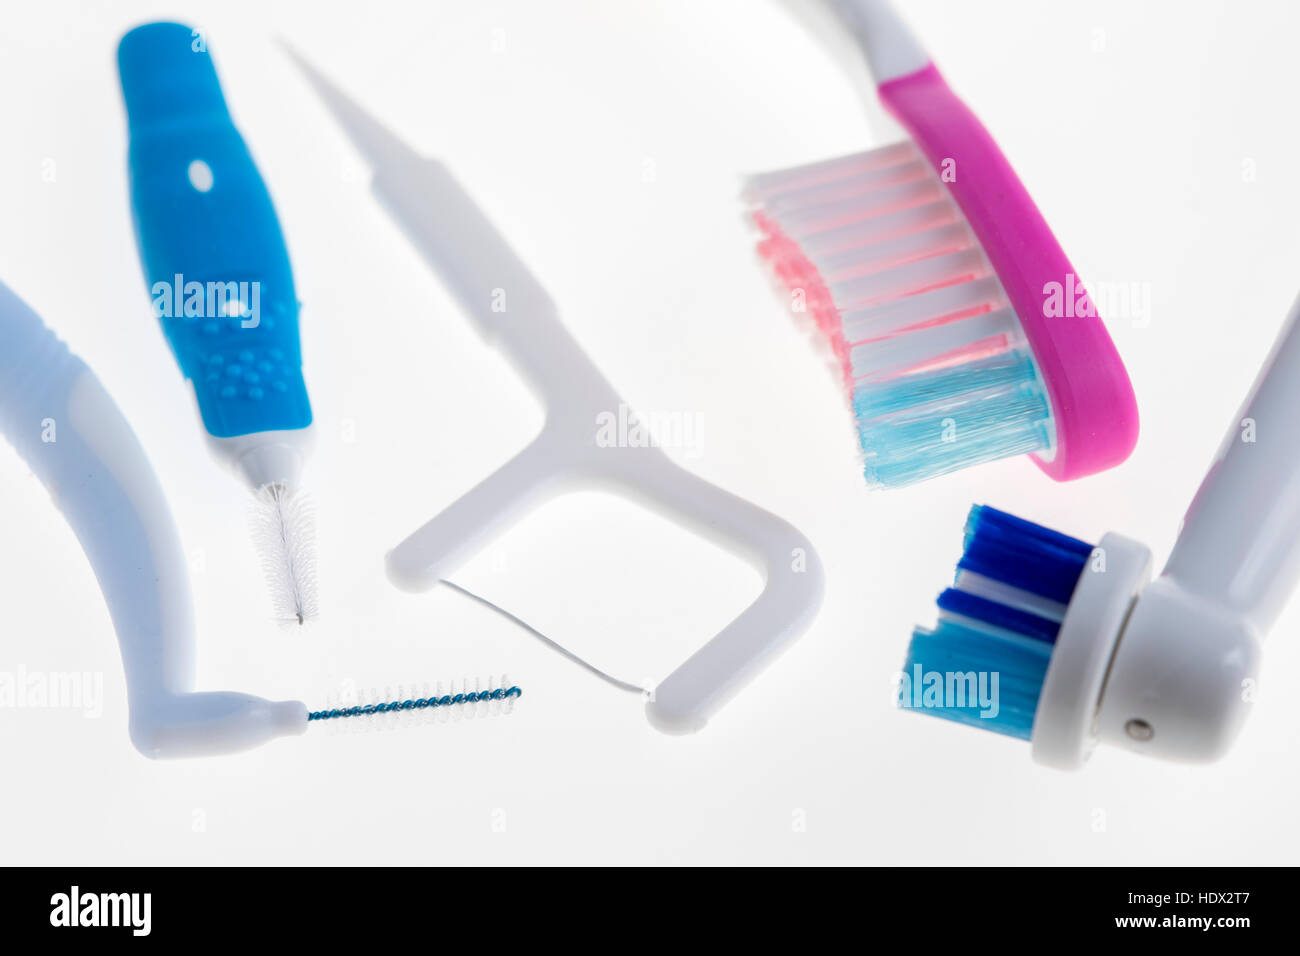 Dental hygiene products, toothbrush, toothpick, electrical toothbrush, interdentalbrush, dental floss, tongue cleaner, Stock Photo